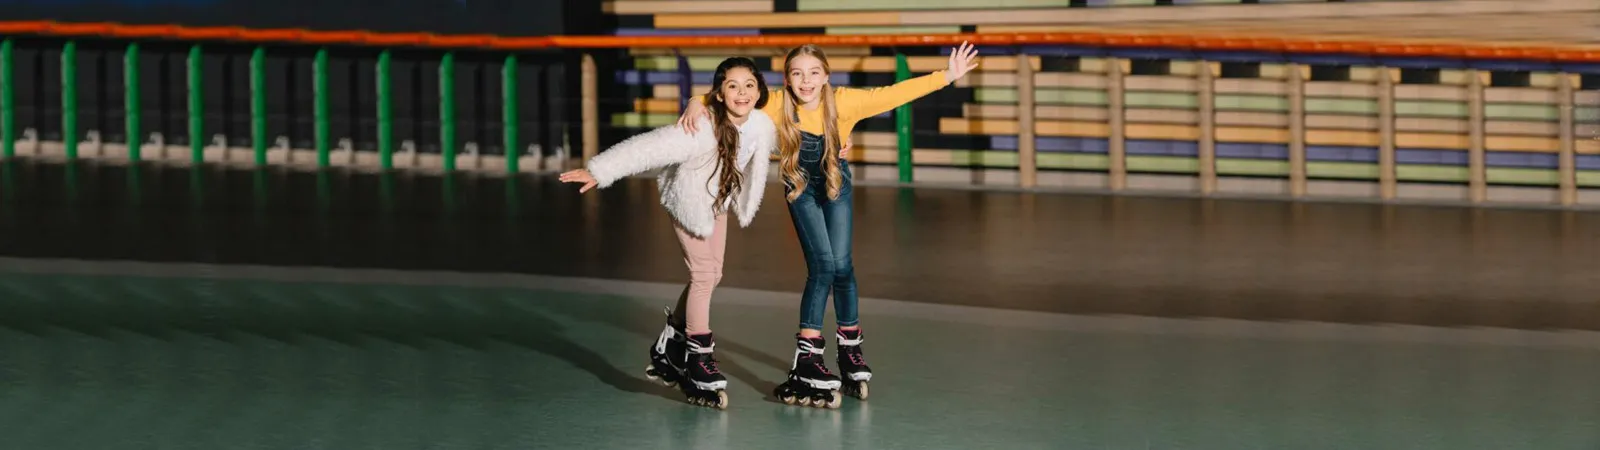 Best Roller Skating Lessons in Los Angles inner image